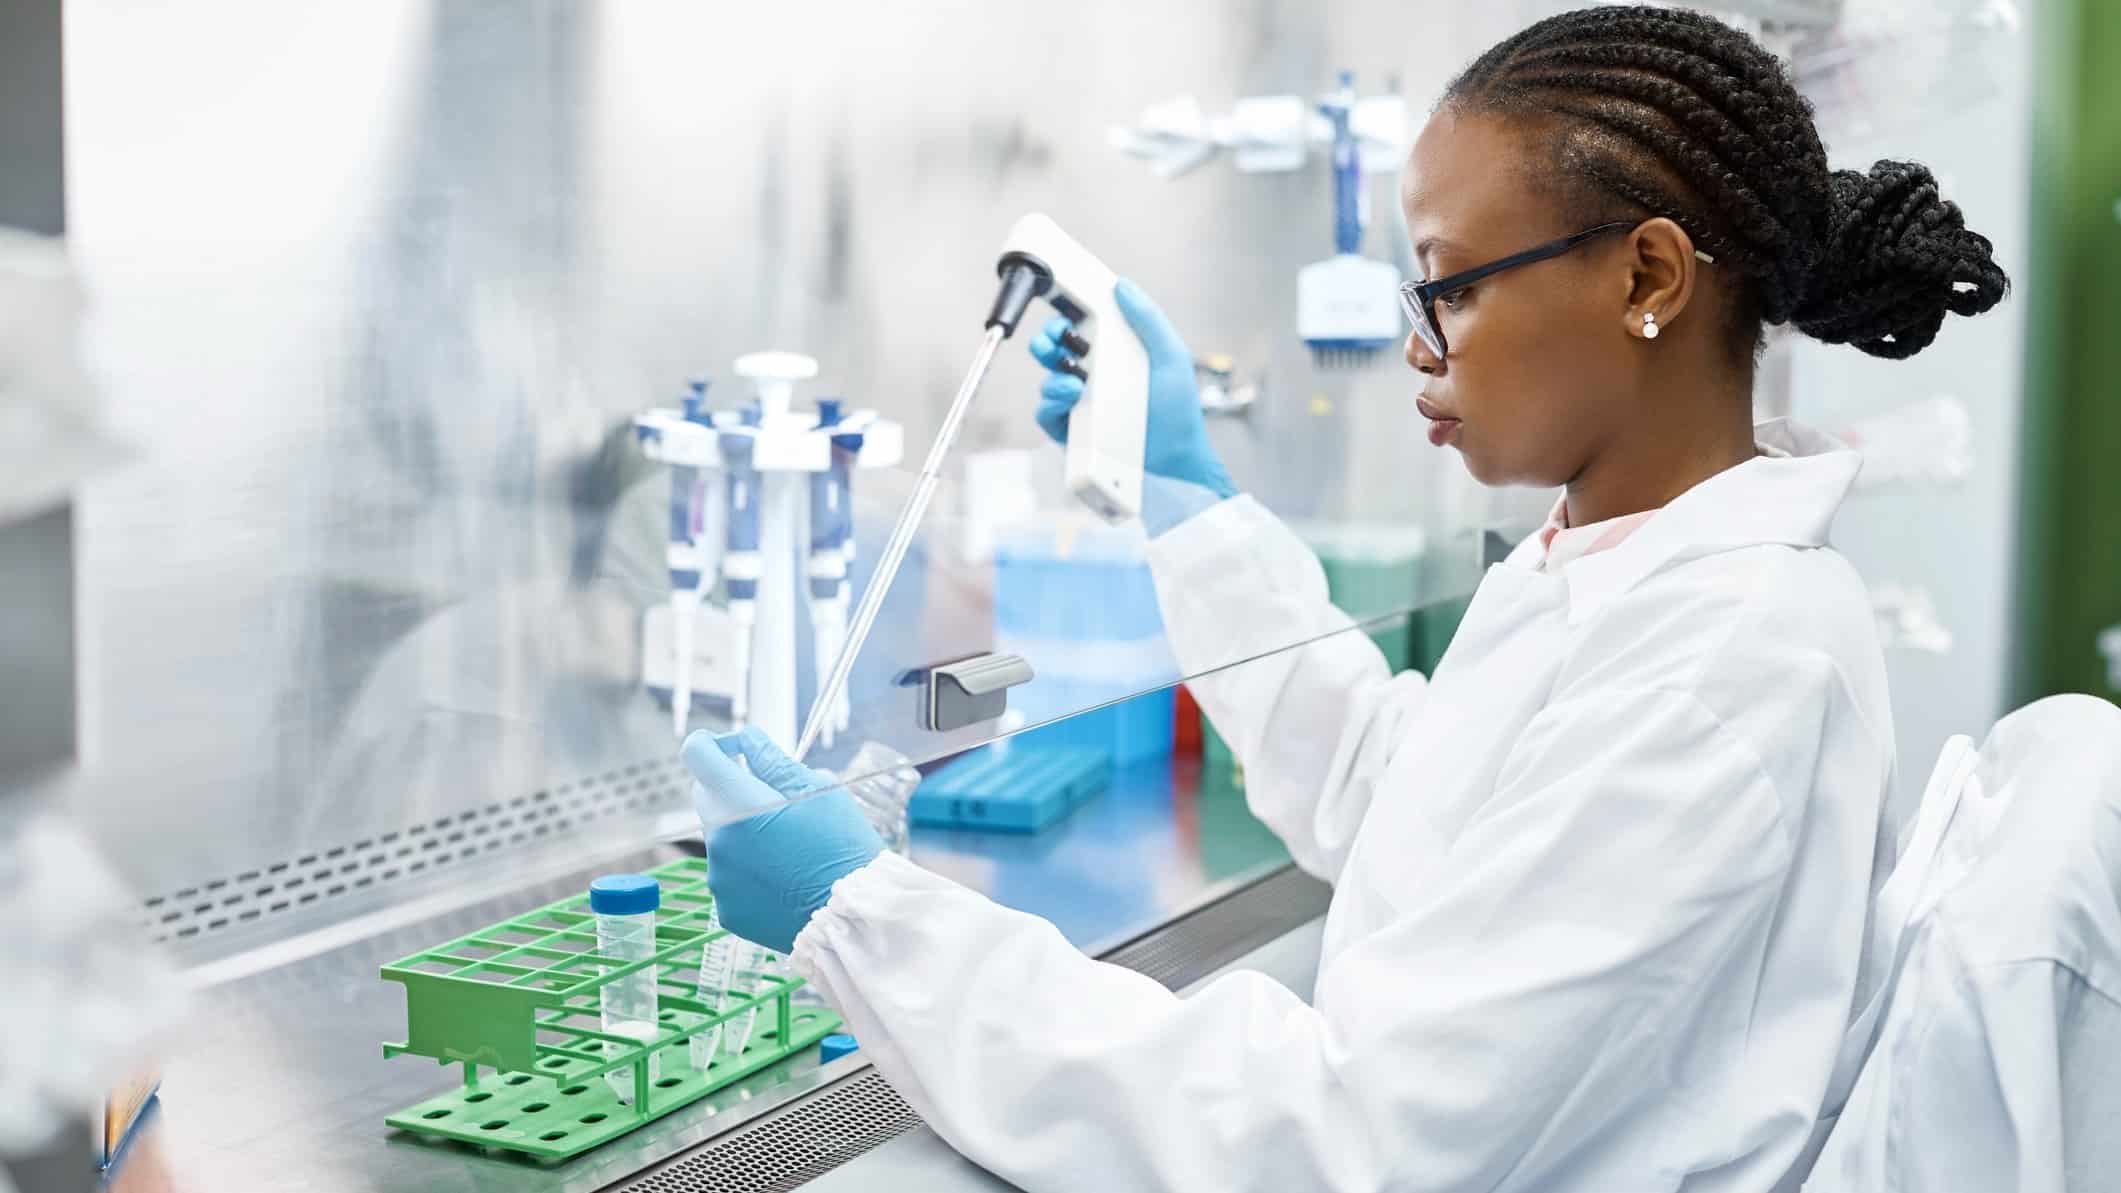 Lab technician analyses a sample in a laboratory for a clinical trial